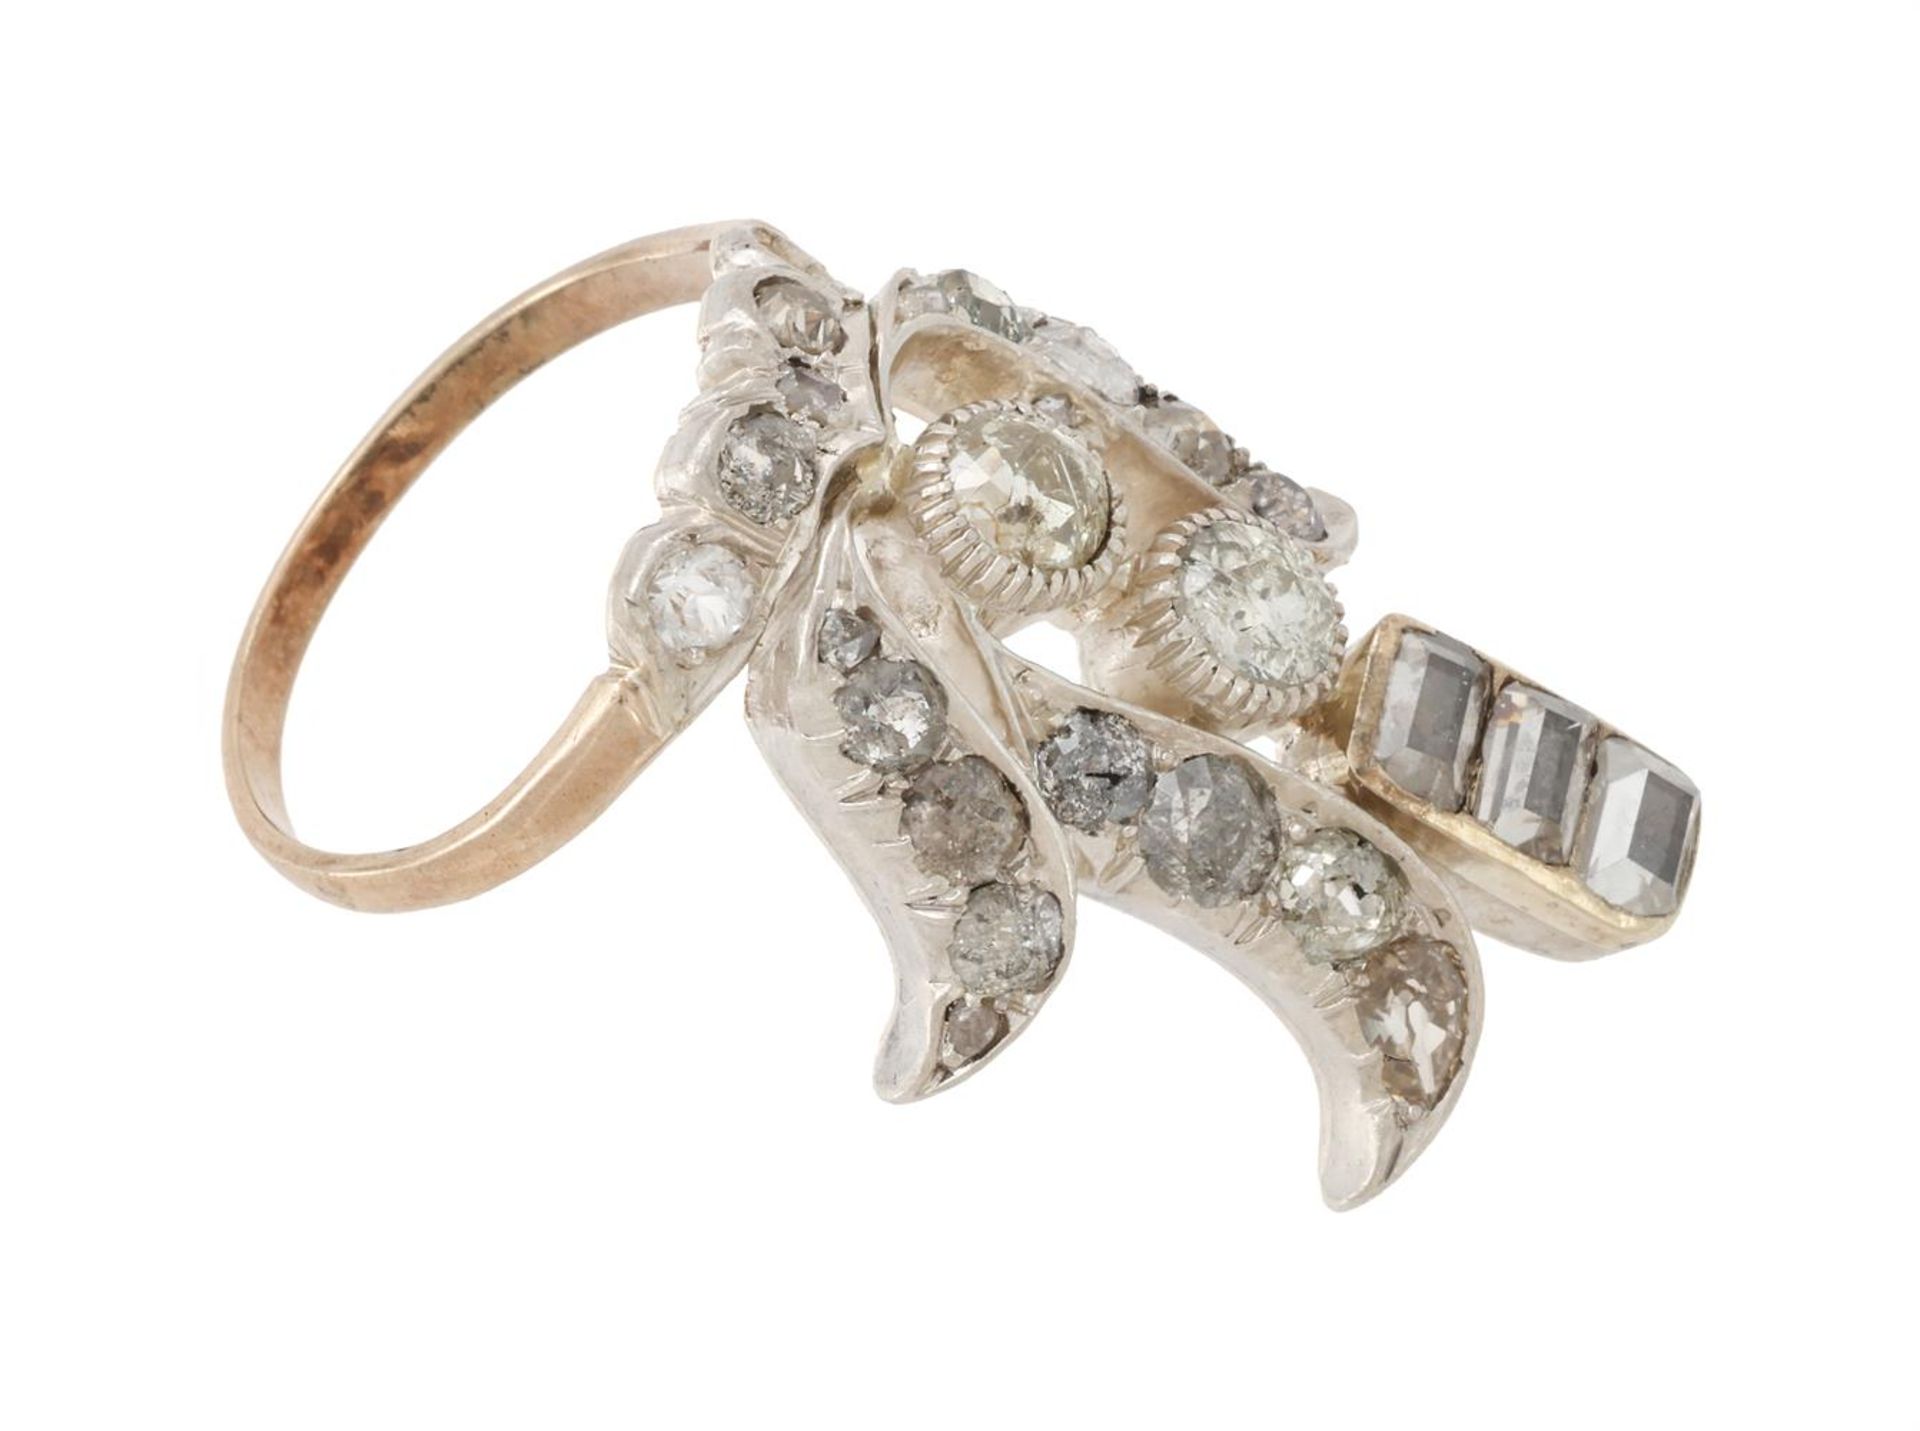 AN EARLY 20TH CENTURY DIAMOND DRESS RING - Image 2 of 2